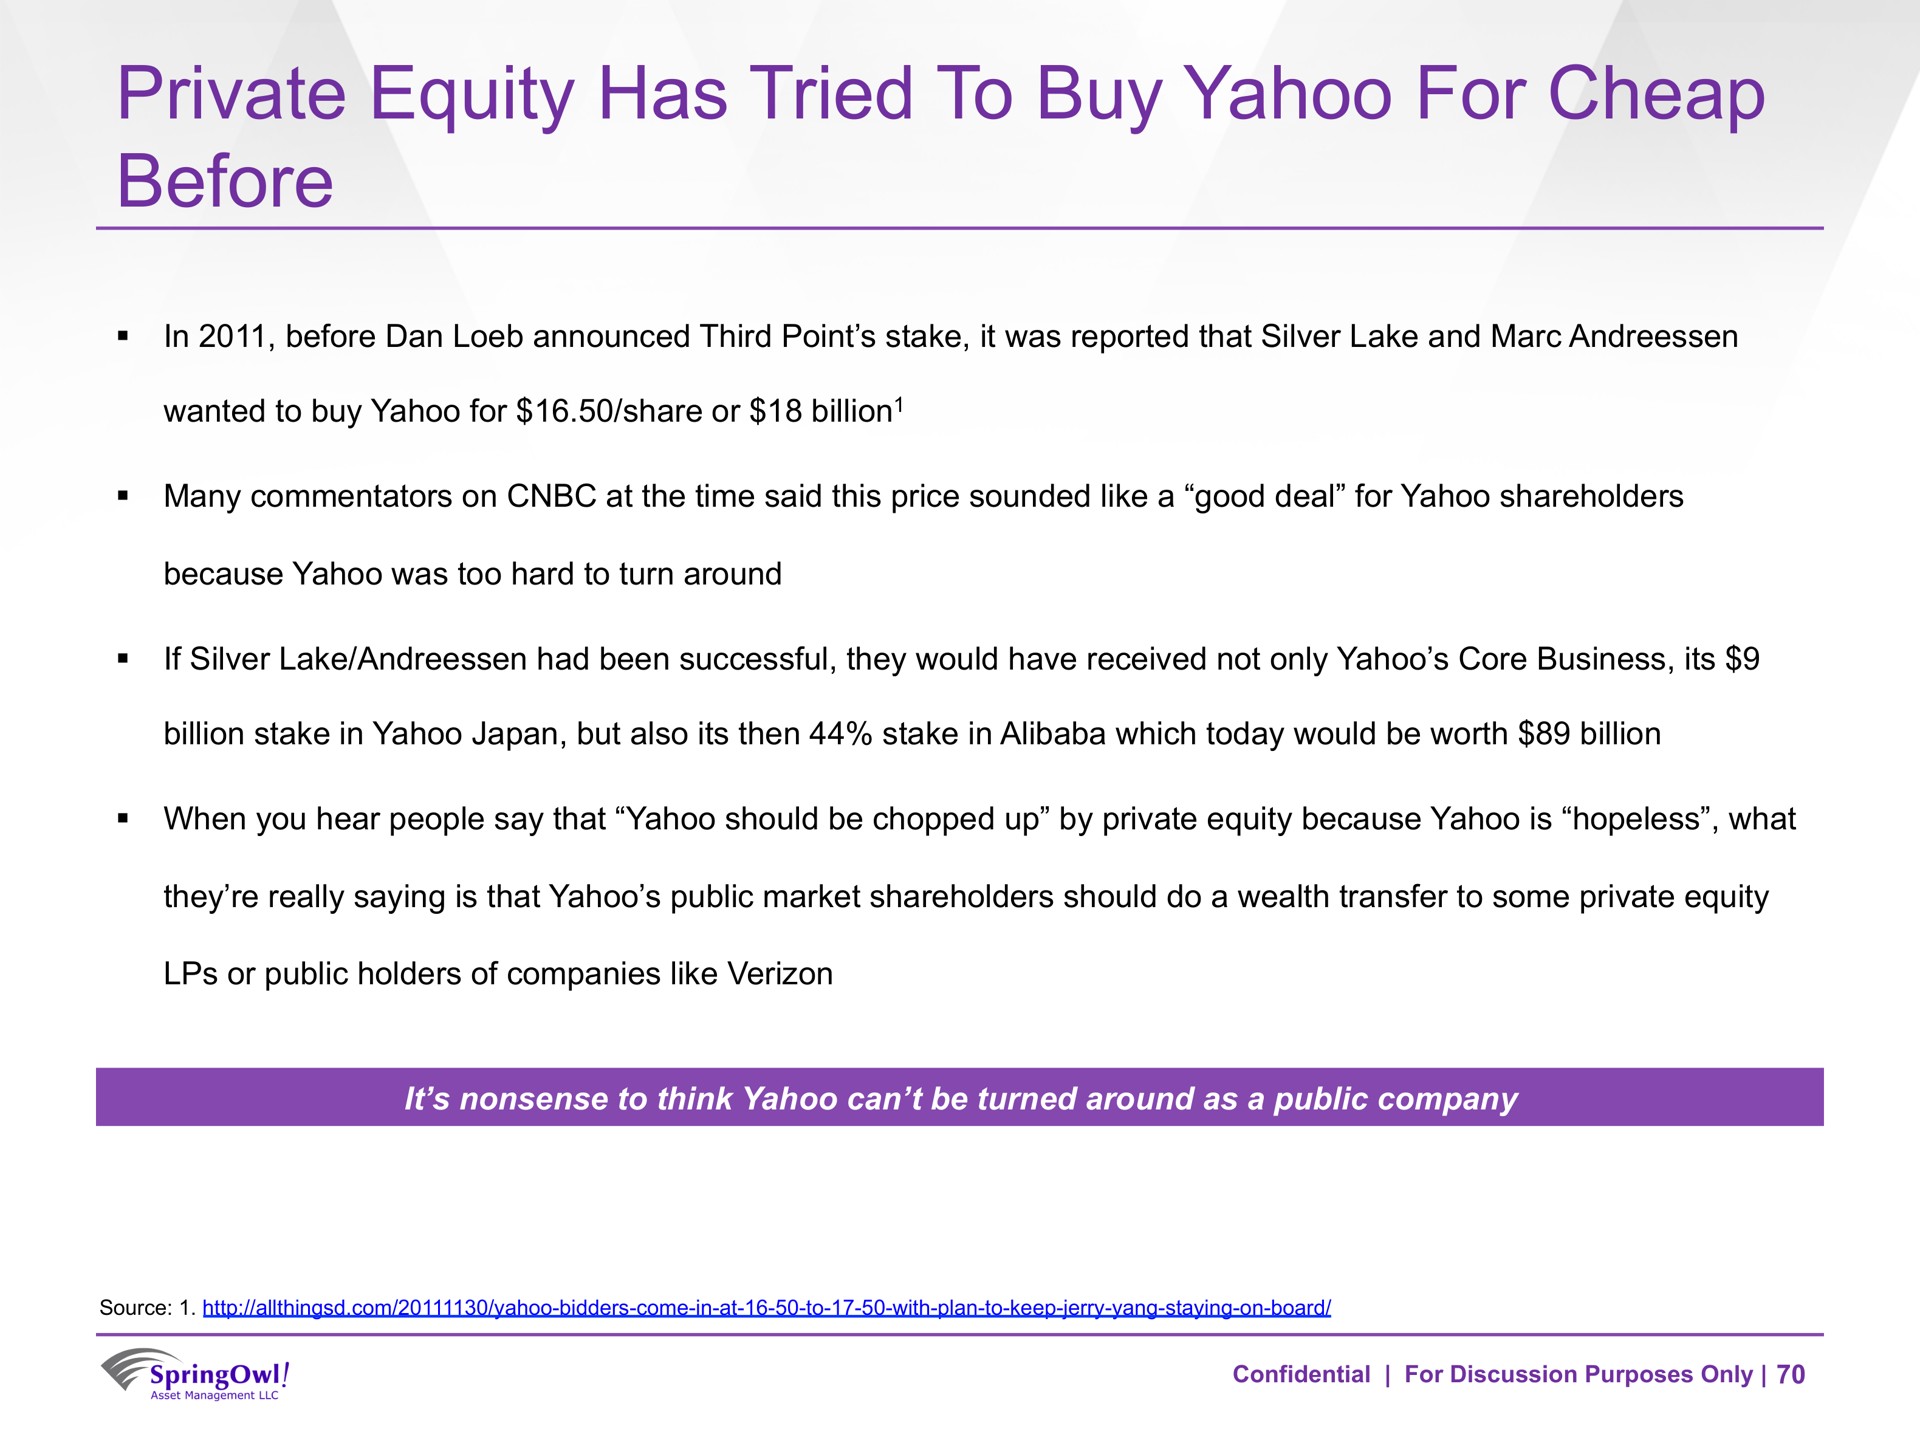 private equity has tried to buy yahoo for cheap before | SpringOwl